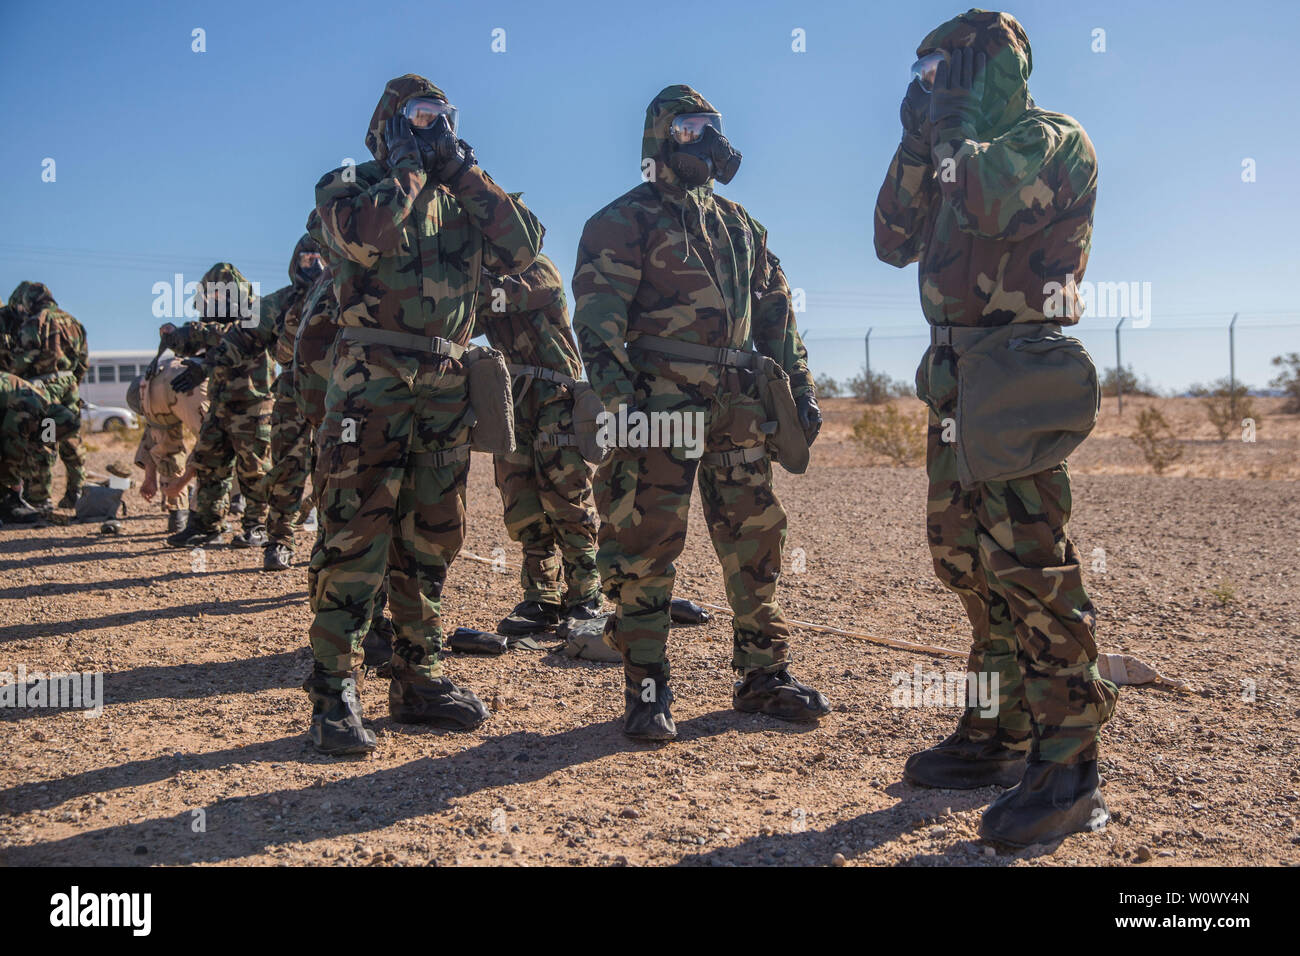 U.S. Marines stationed at Marine Corps Air Station (MCAS) Yuma conduct their Chemical, Biological, Radiological and Nuclear Defense (CBRN) training at the MCAS Yuma, Ariz. Gas Chamber, June 27, 2019. The gas chamber is a controlled environment in which a non-lethal gas is released, allowing Marines to test their issued gas masks and become familiar with the effects of gas. (U.S. Marine Corps photo by Cpl. Sabrina Candiaflores) Stock Photo